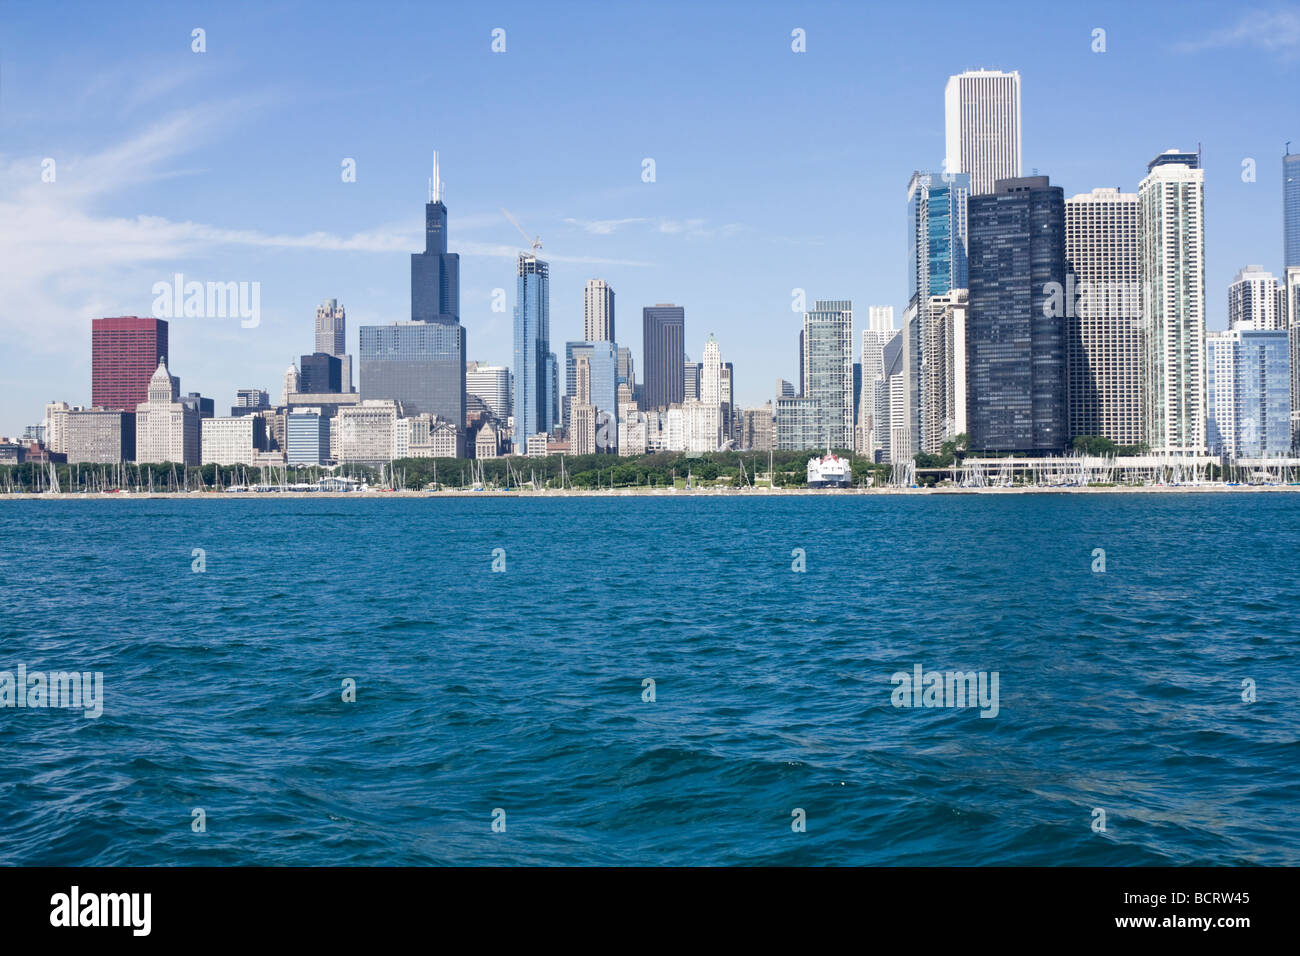 Downtown Chicago seen from Lake Michigan Stock Photo